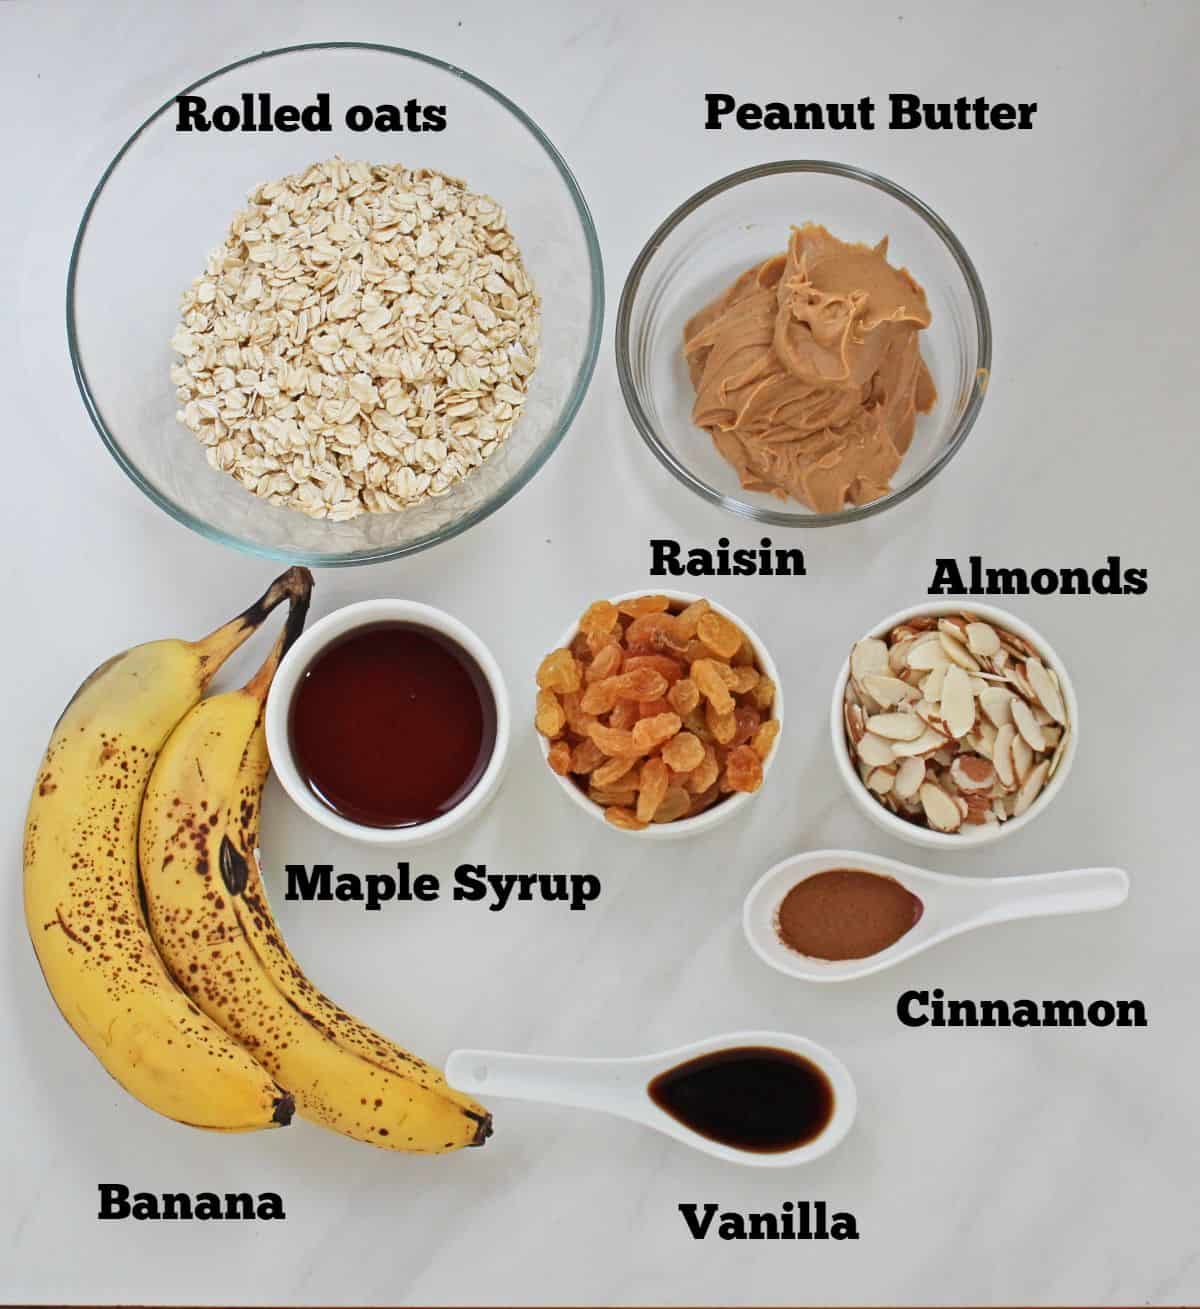 Ingredients needed to make banana oats bar laid out and labeled.